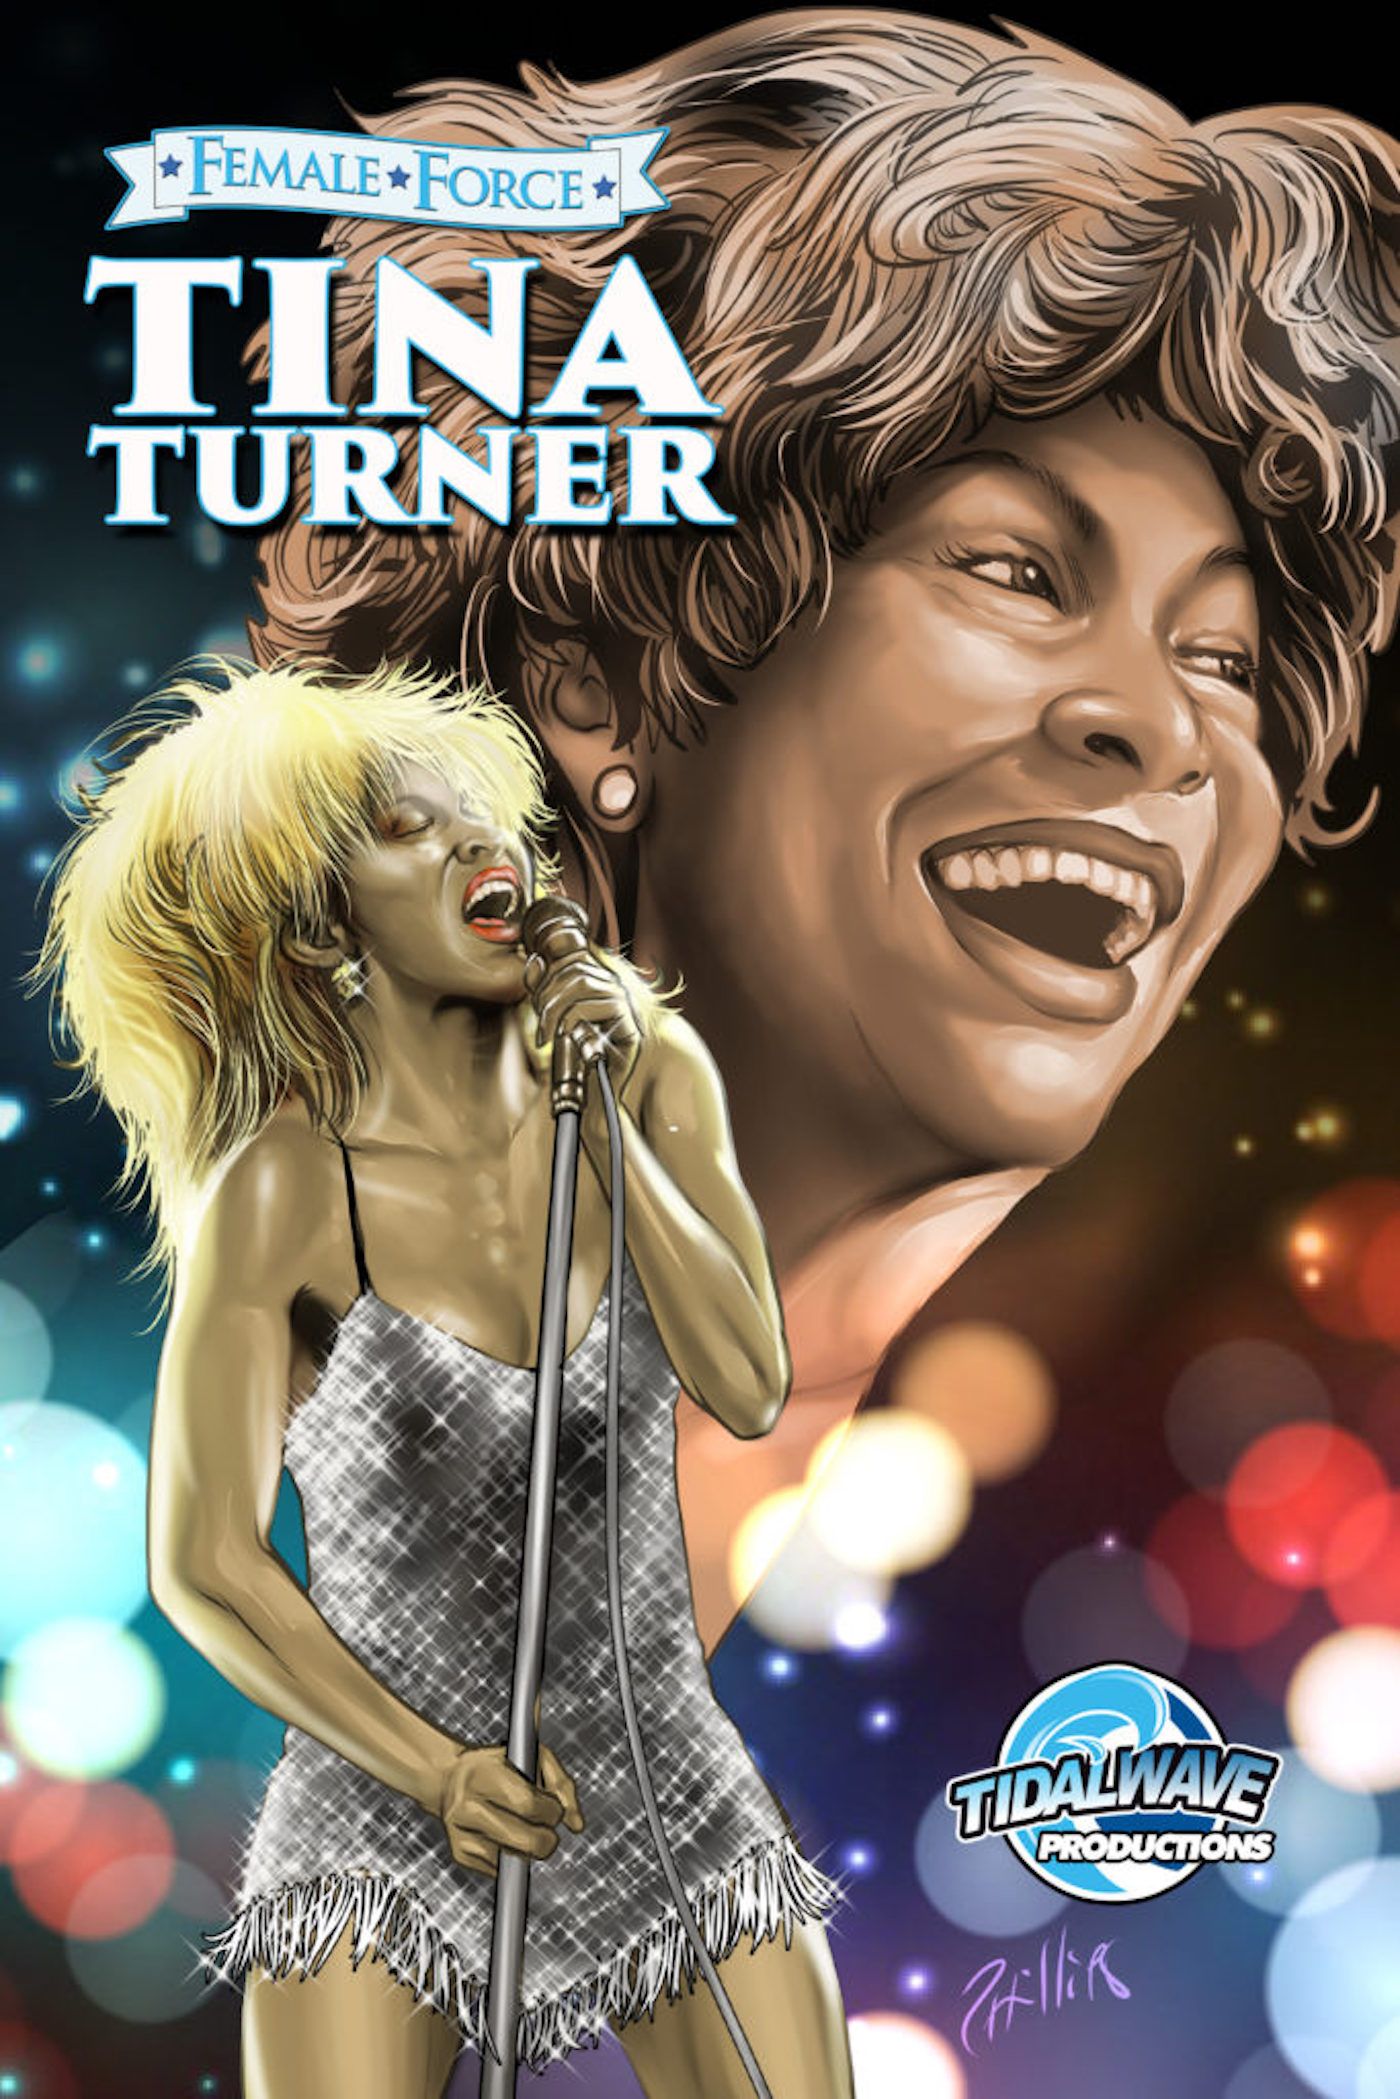 Tina Turner Becomes The Comic Book Hero She Always Deserved to Be